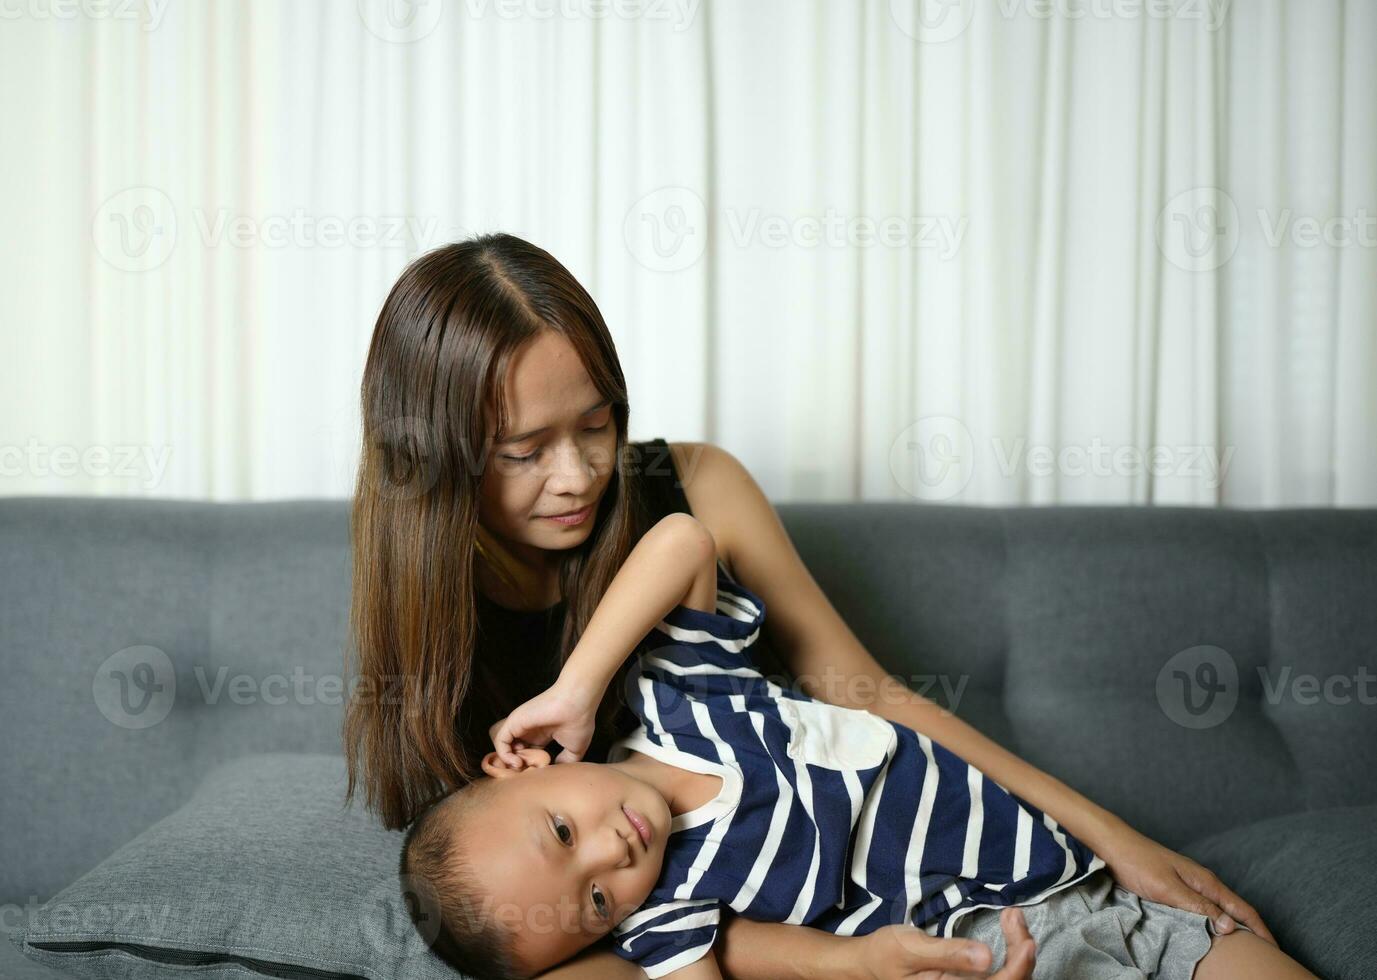 A son sleeps on his mother's lap inside the house. photo